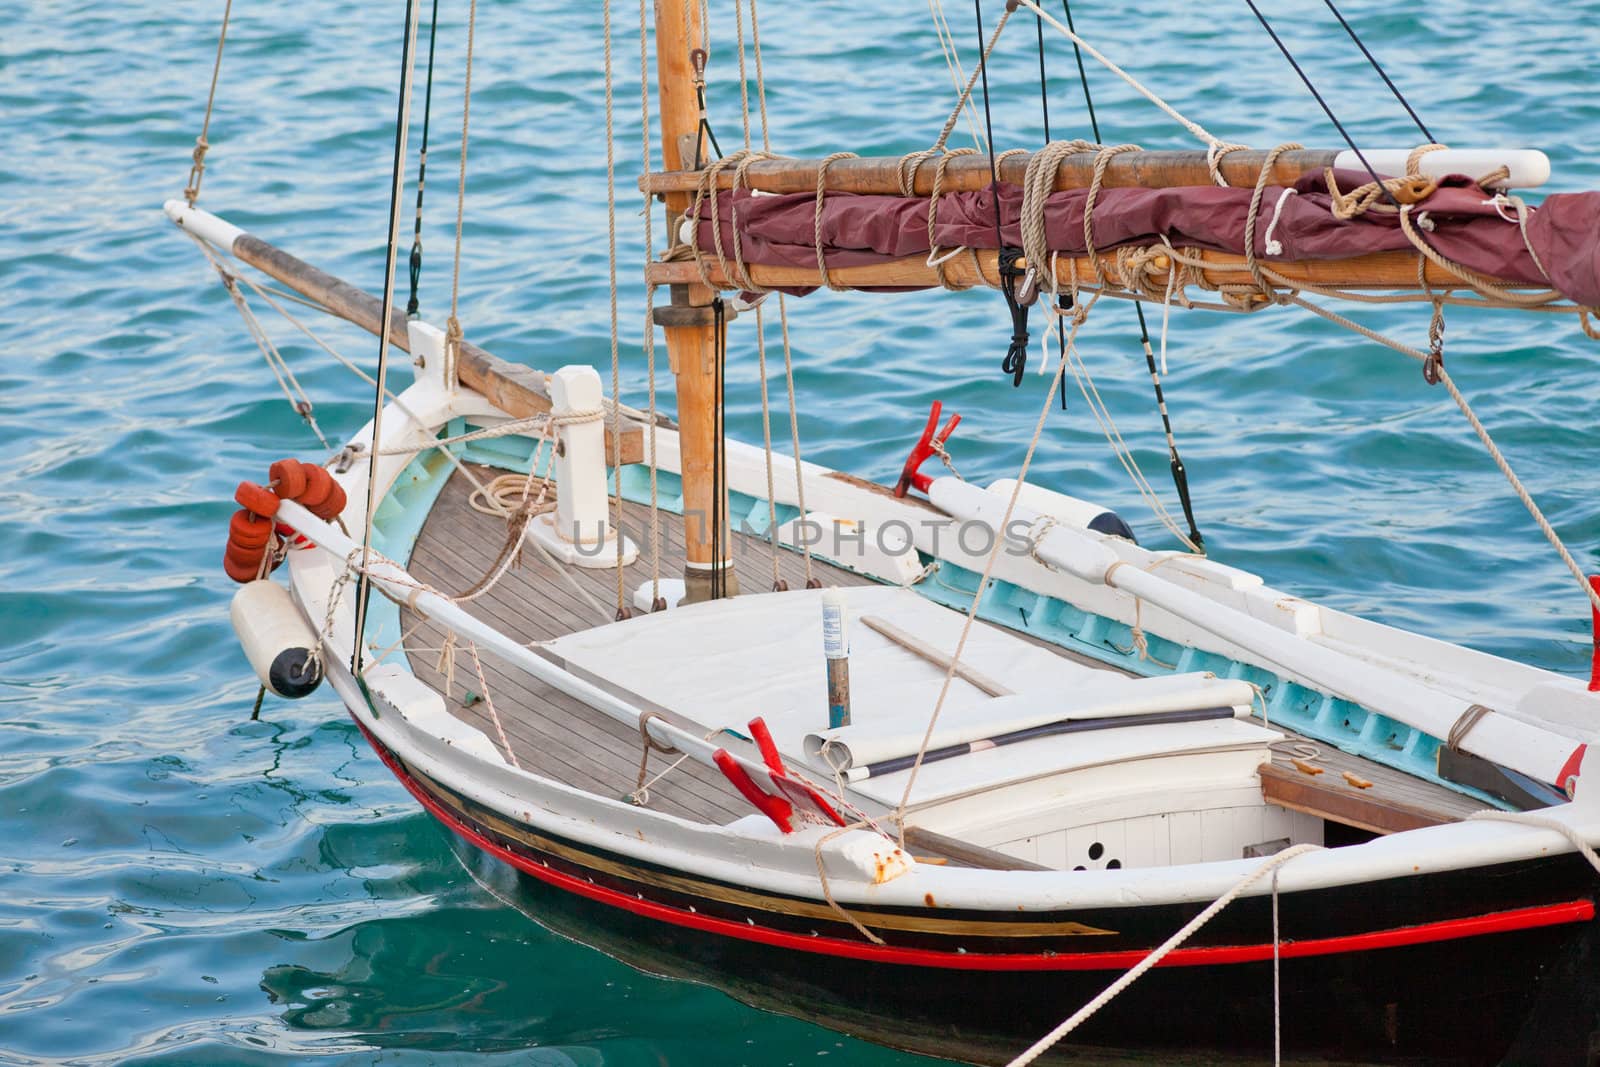 Small traditional Greek sailboat moored in harbor.